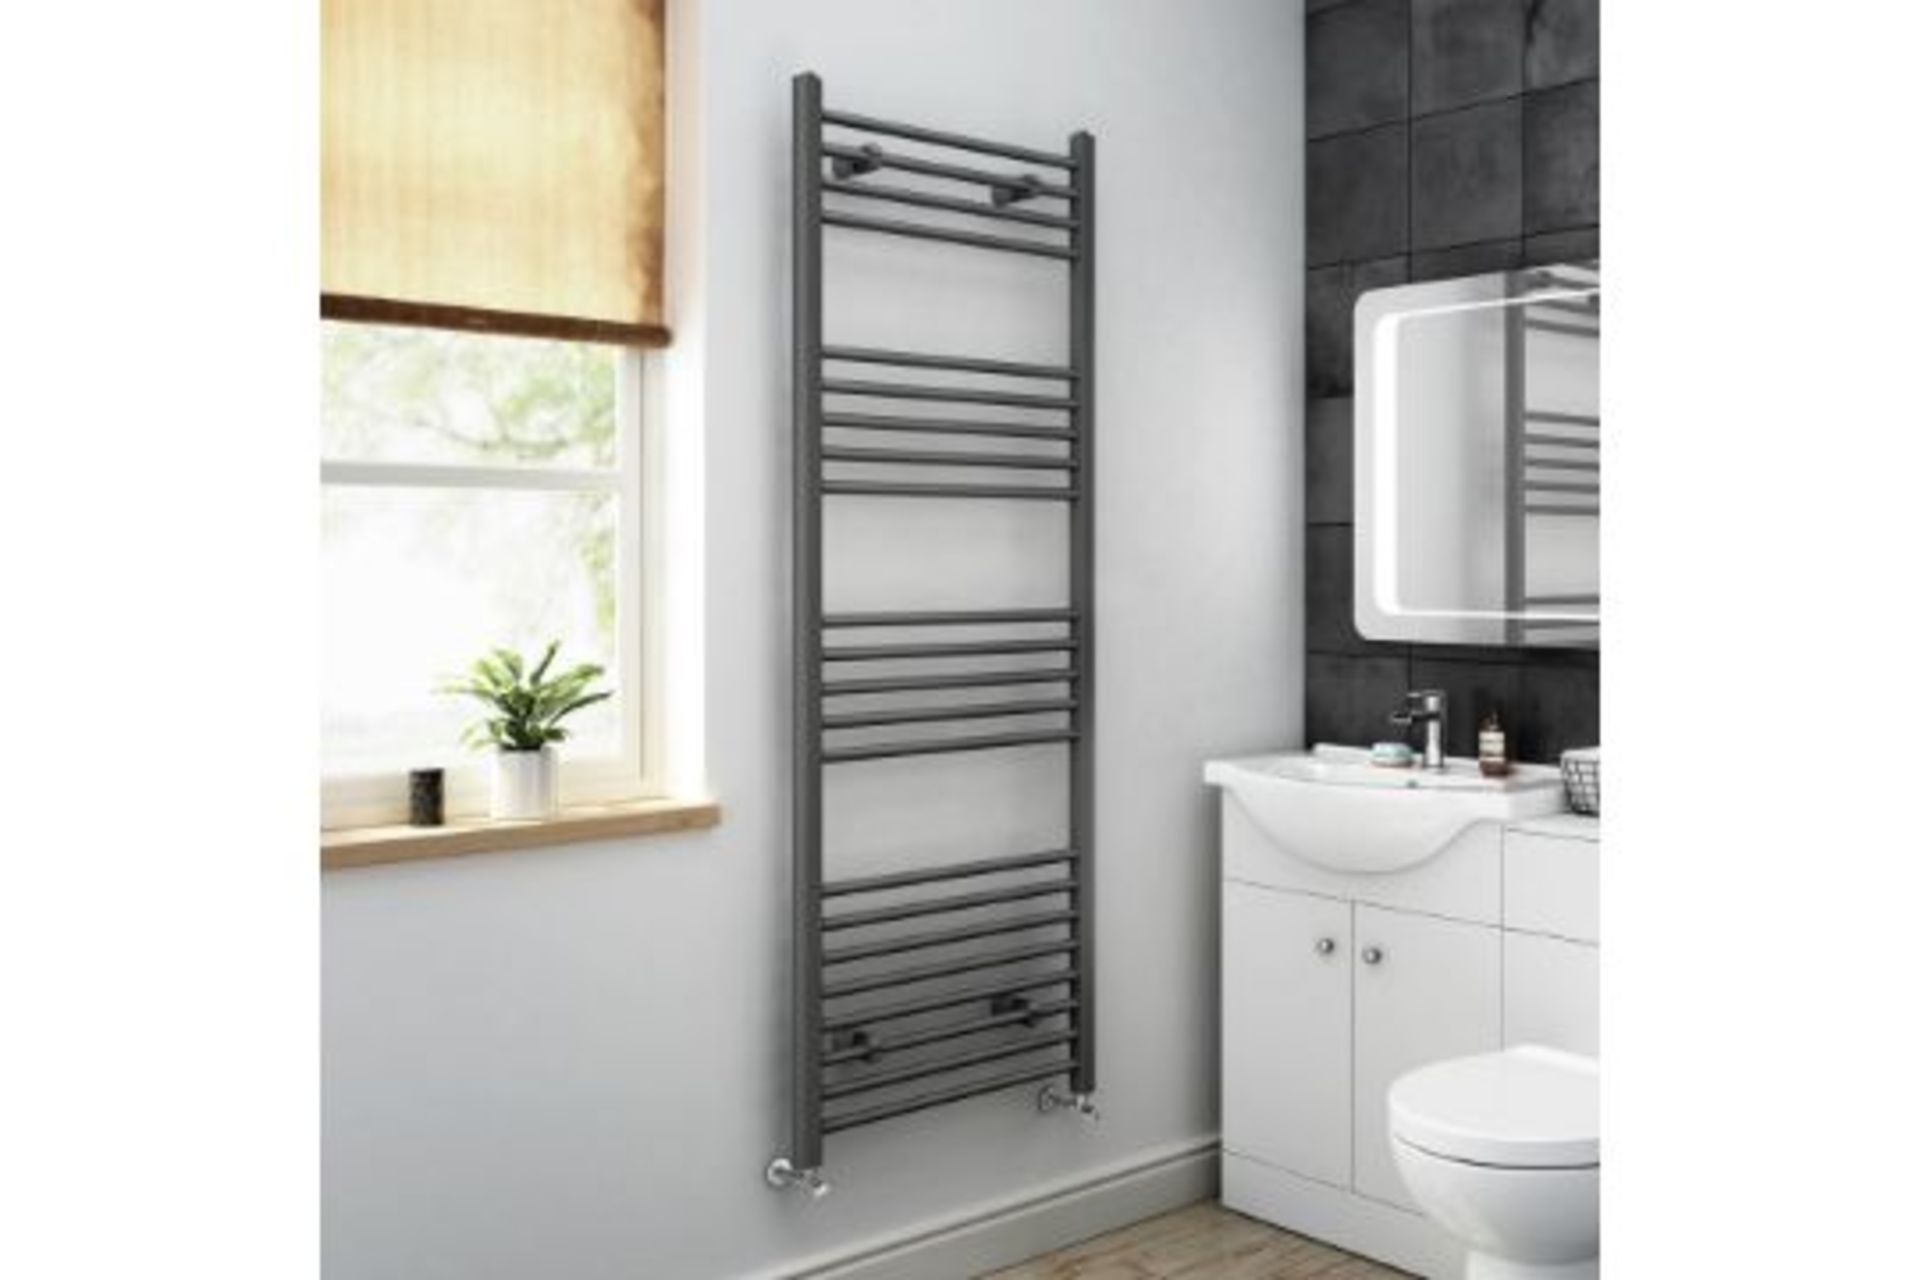 Brand New 1600x450mm - 20mm Tubes - Anthracite Heated Straight Rail Ladder Towel Radiator. Na1600450 - Image 2 of 2